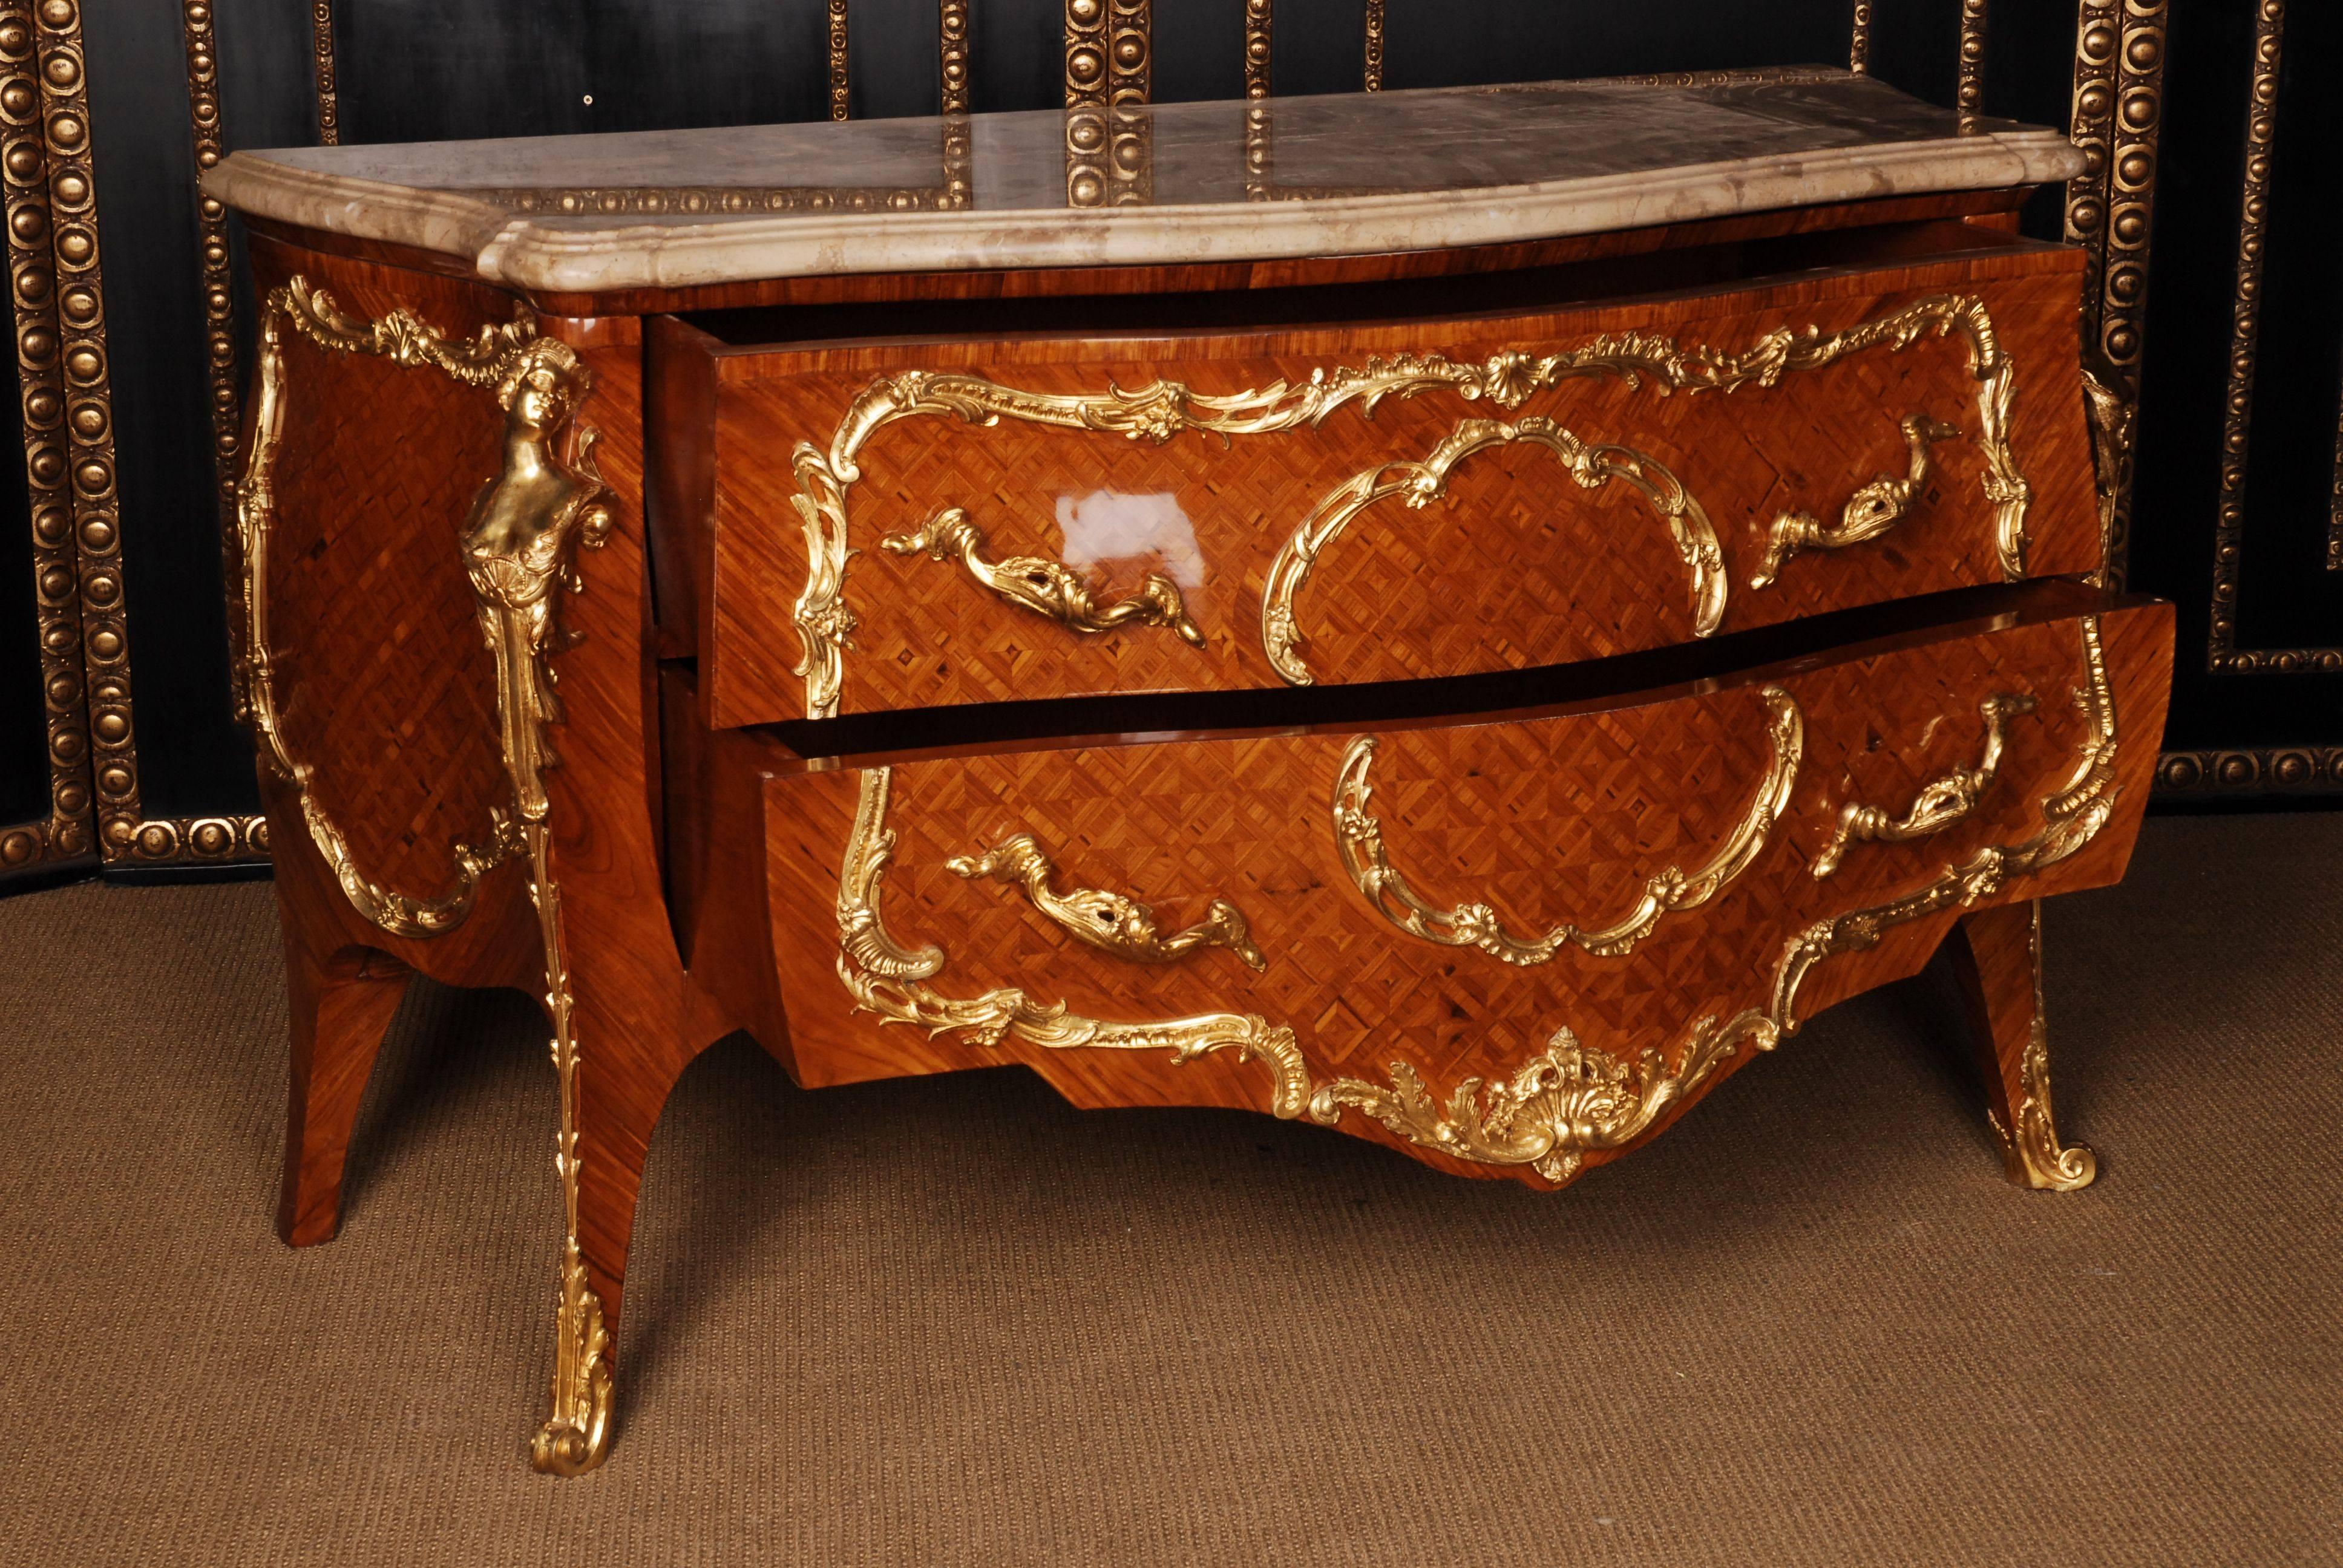 20th century Louis XV French Commode style after Francois Linke
Parketterie from Royal Woods on solid beechwood. Imposing Espagnoette style of Charles Cressent. 

Delivery time takes about 6-8 weeks.

(D-Sam-121).
 